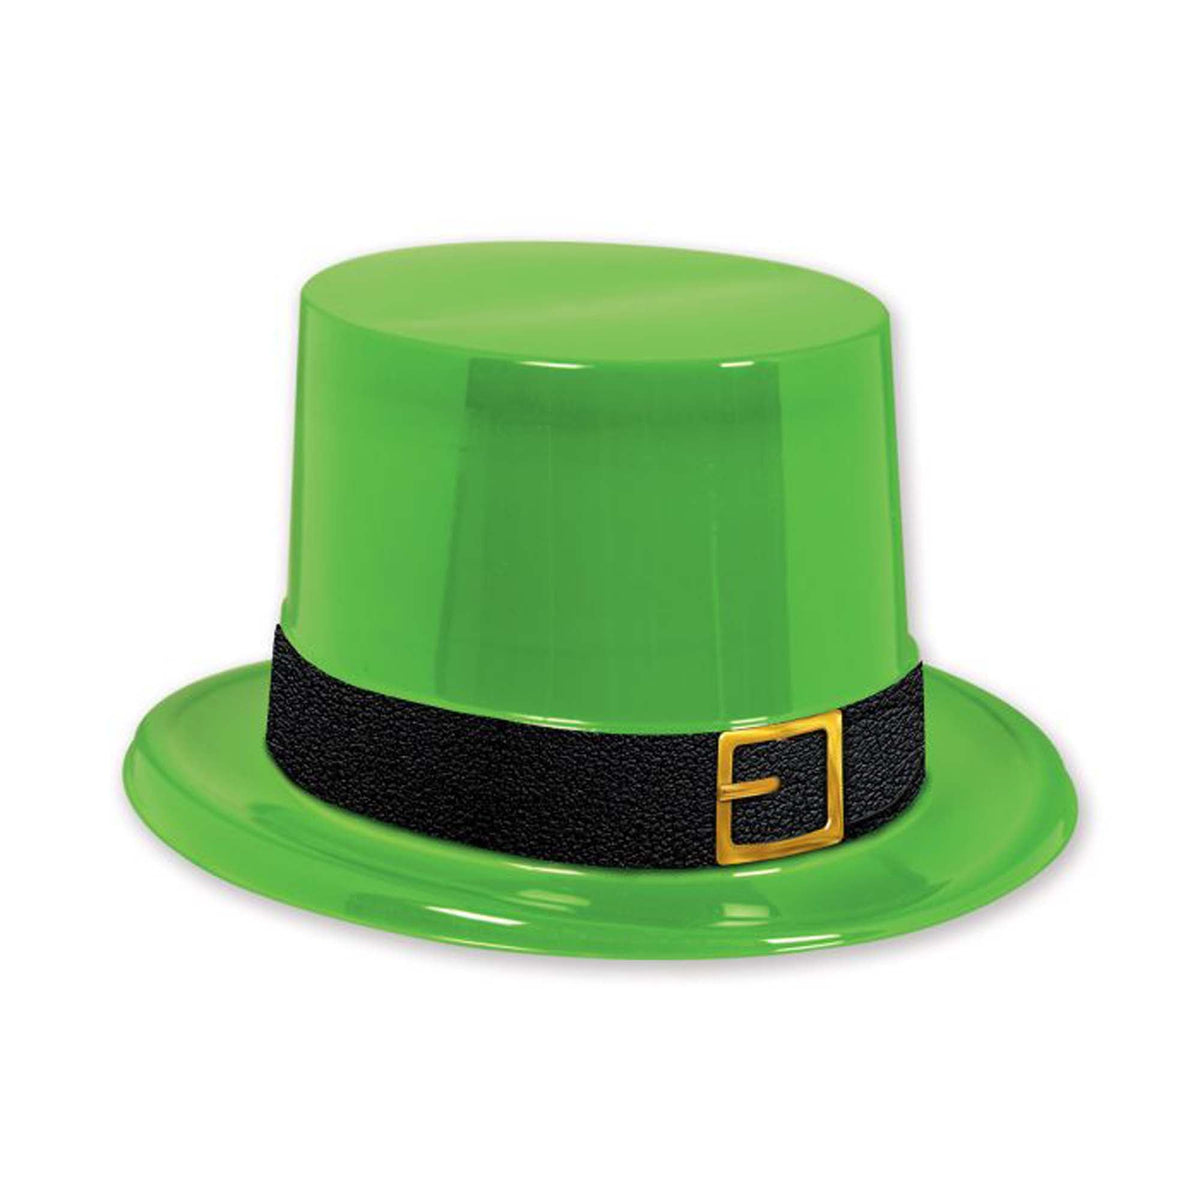 BEISTLE COMPANY St-Patrick St-Patrick's Day Green Plastic Hat, 1 Count 034689043614